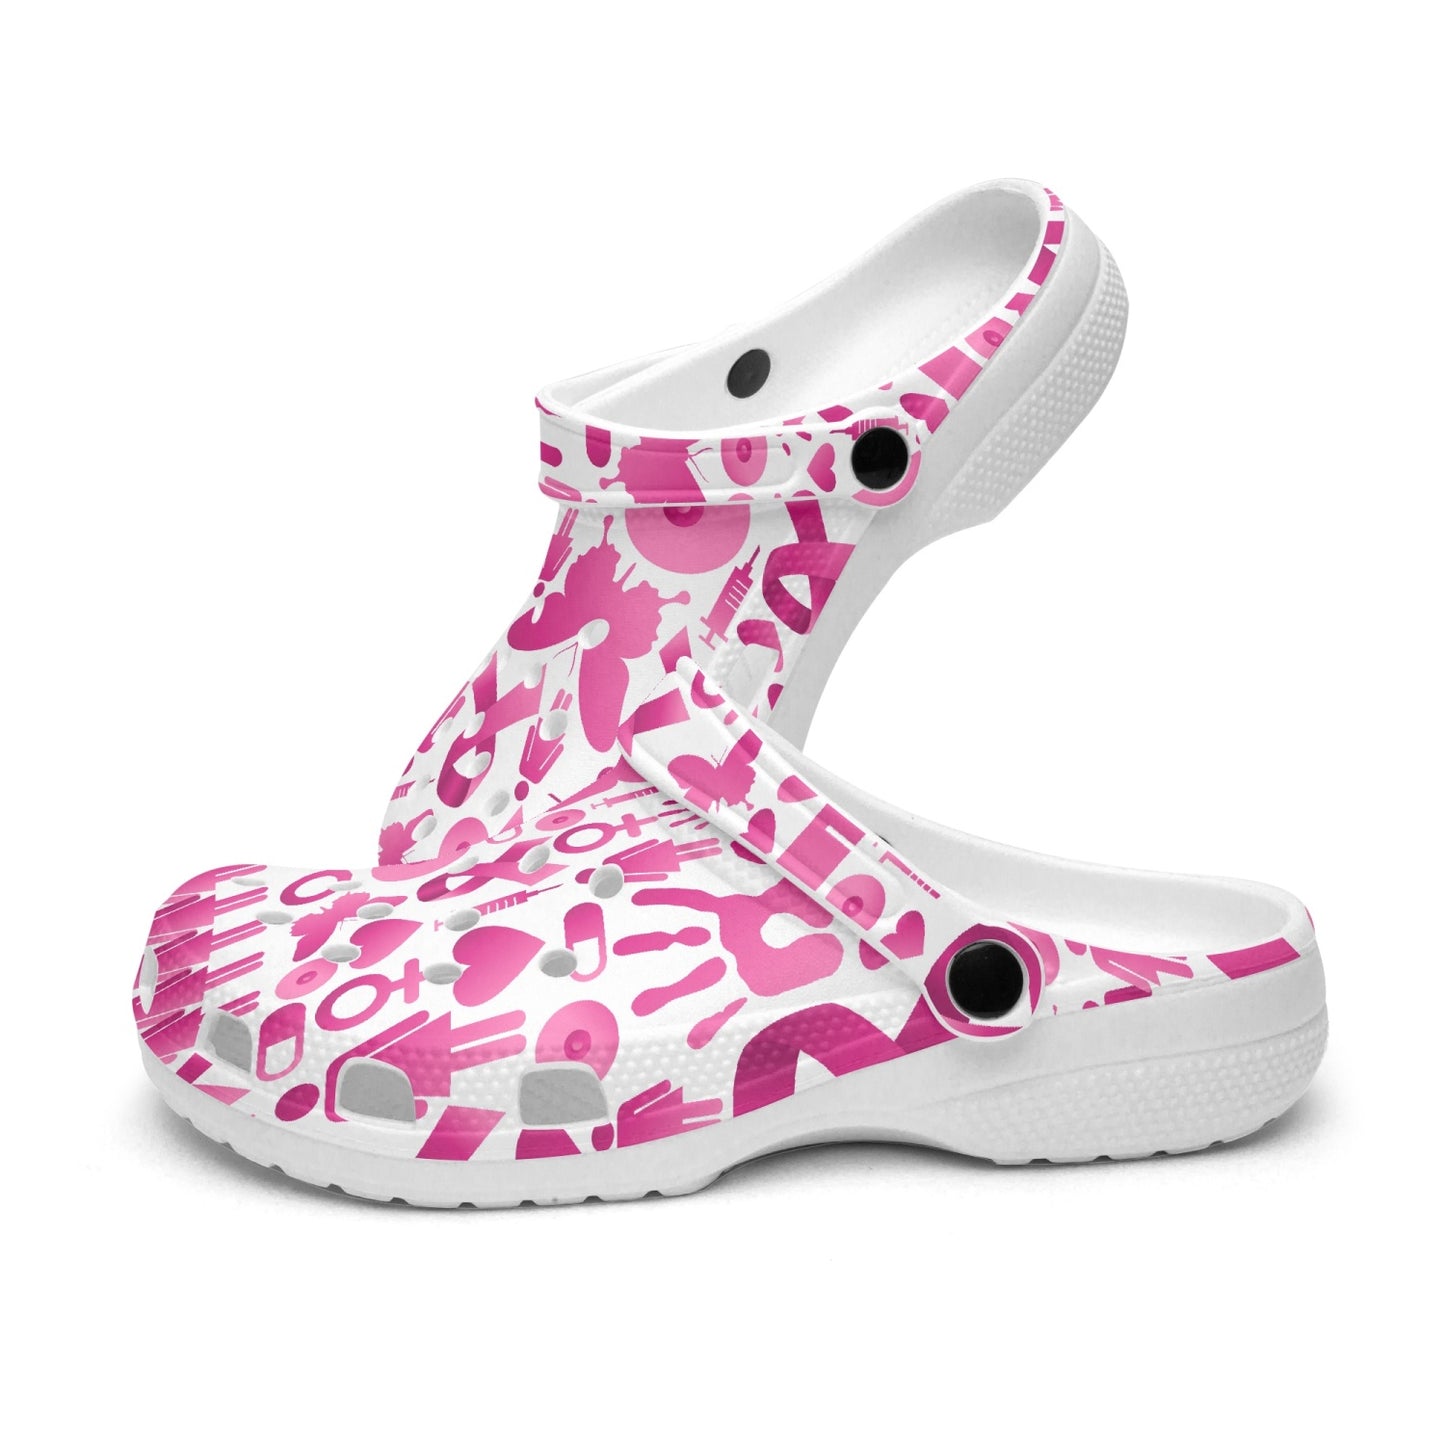 Breast cancer Research clogs